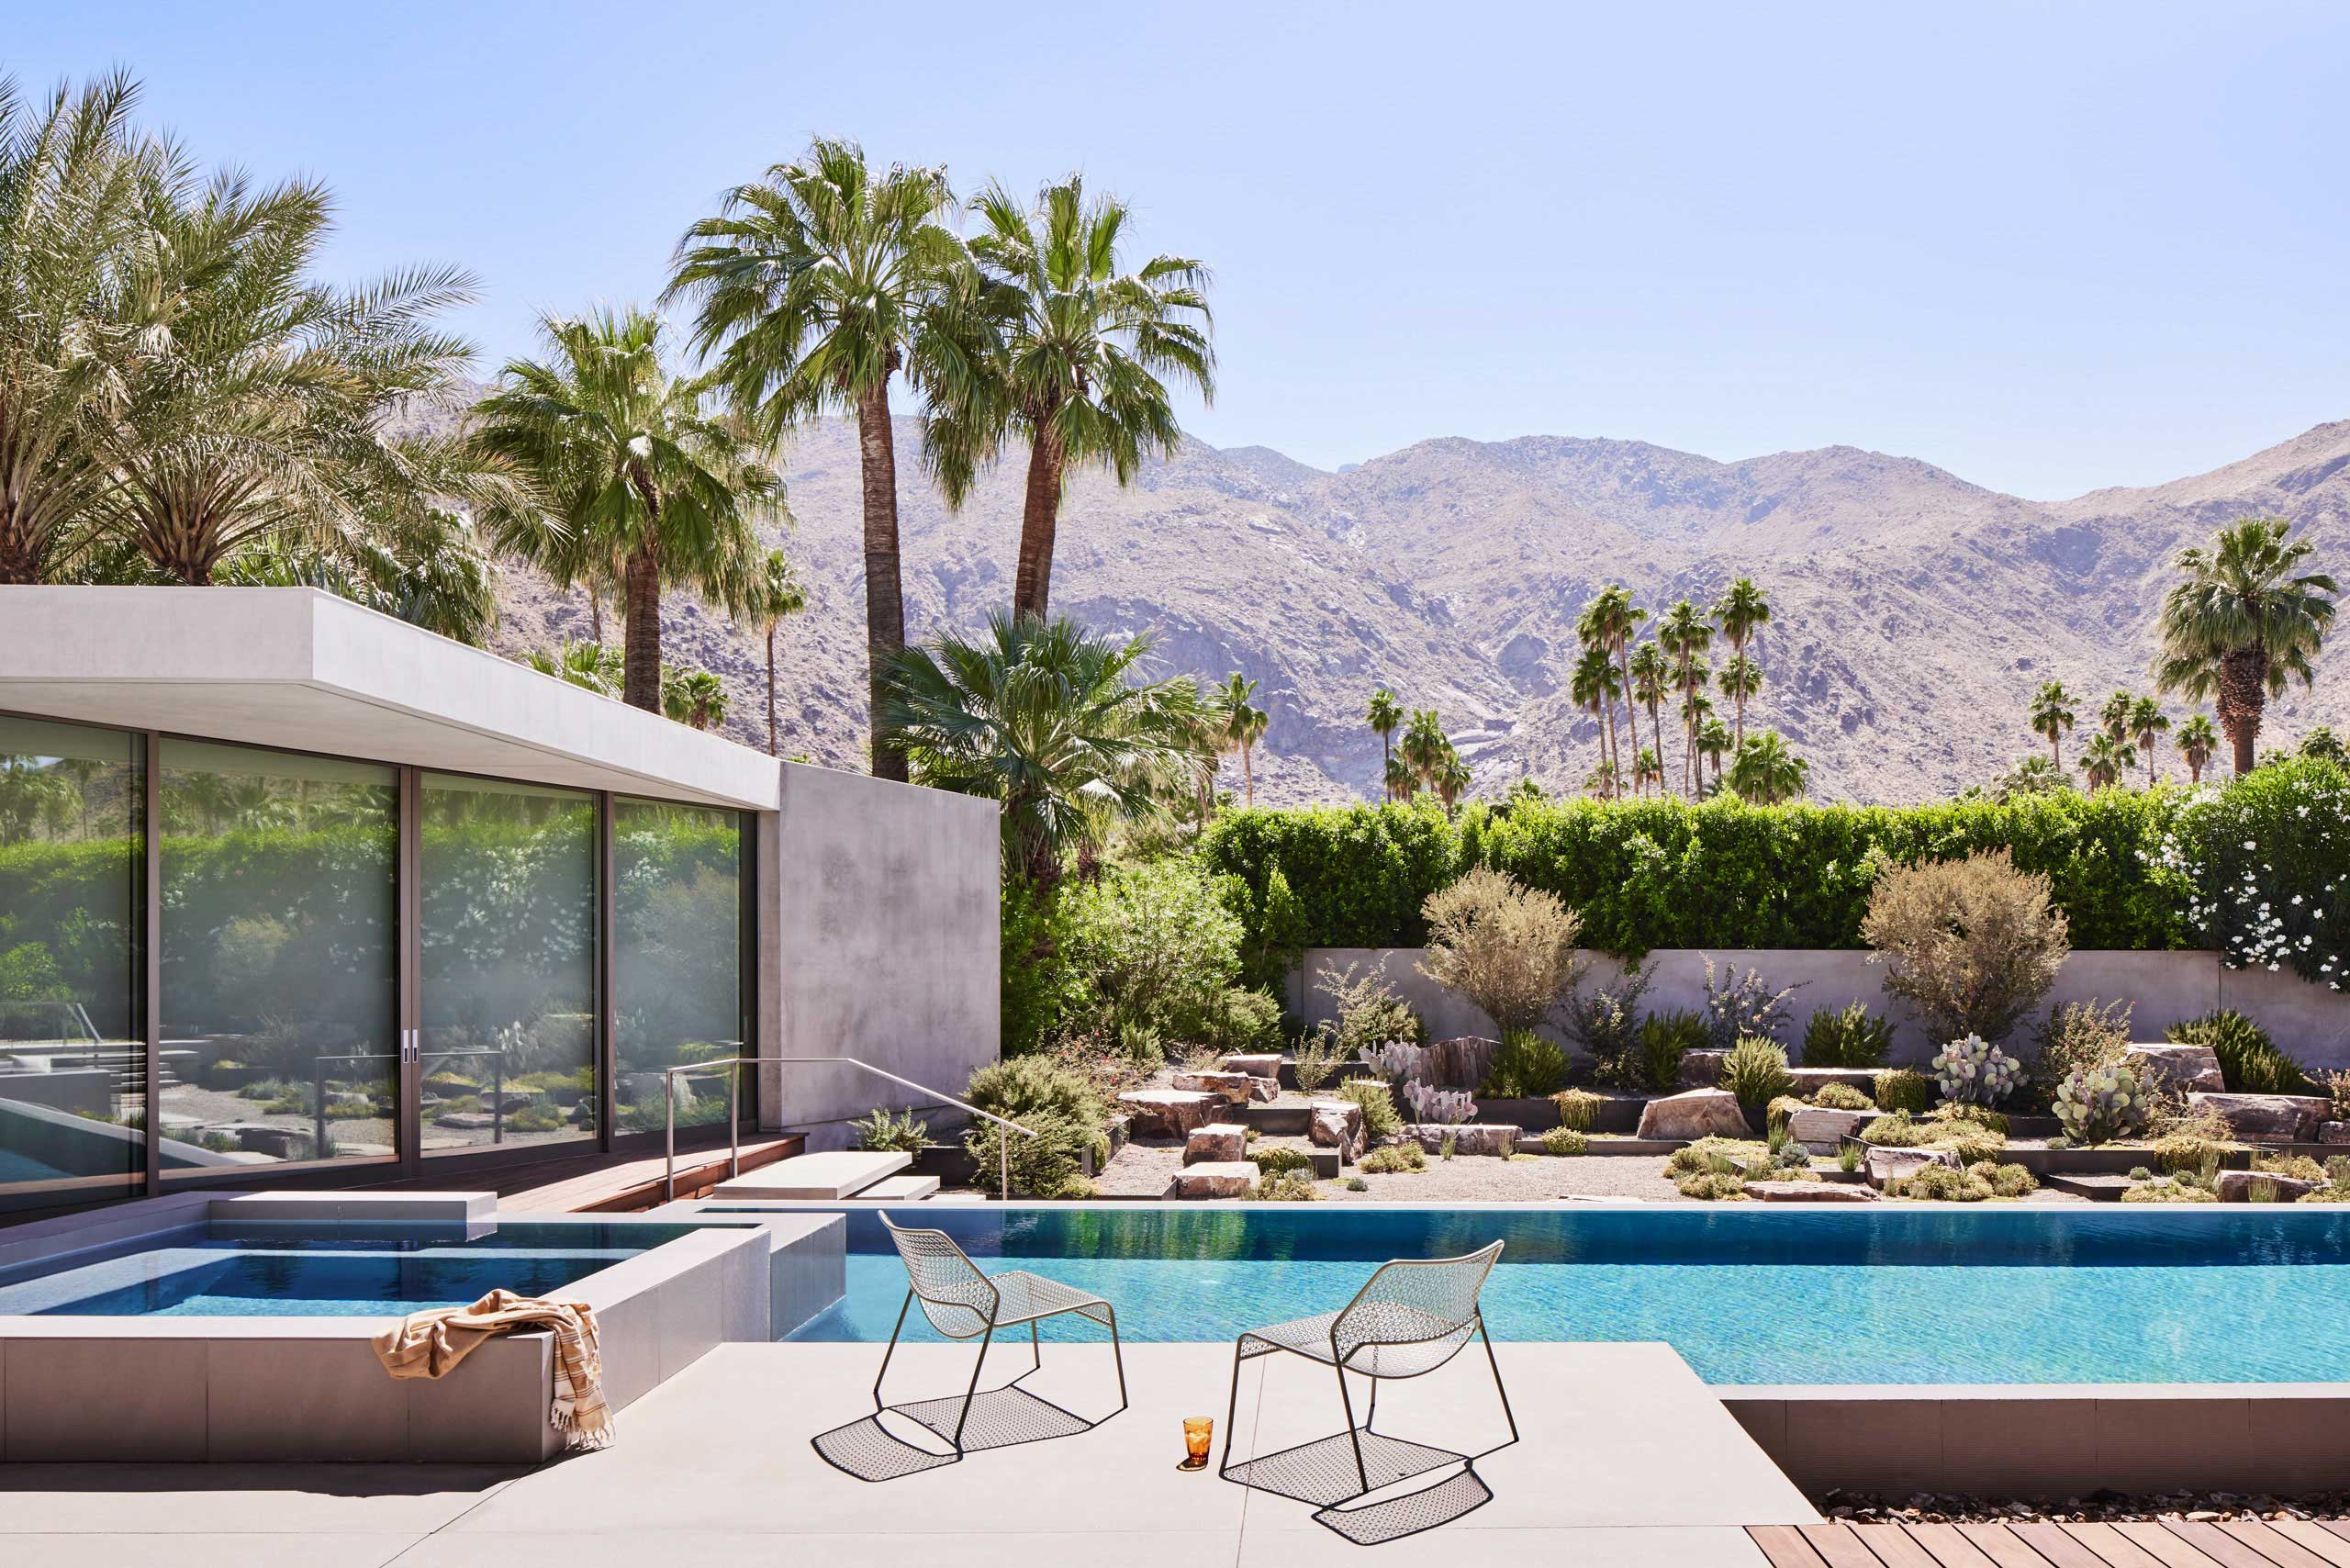 Wallpaper Features Slot Canyon Residence in Palm Springs